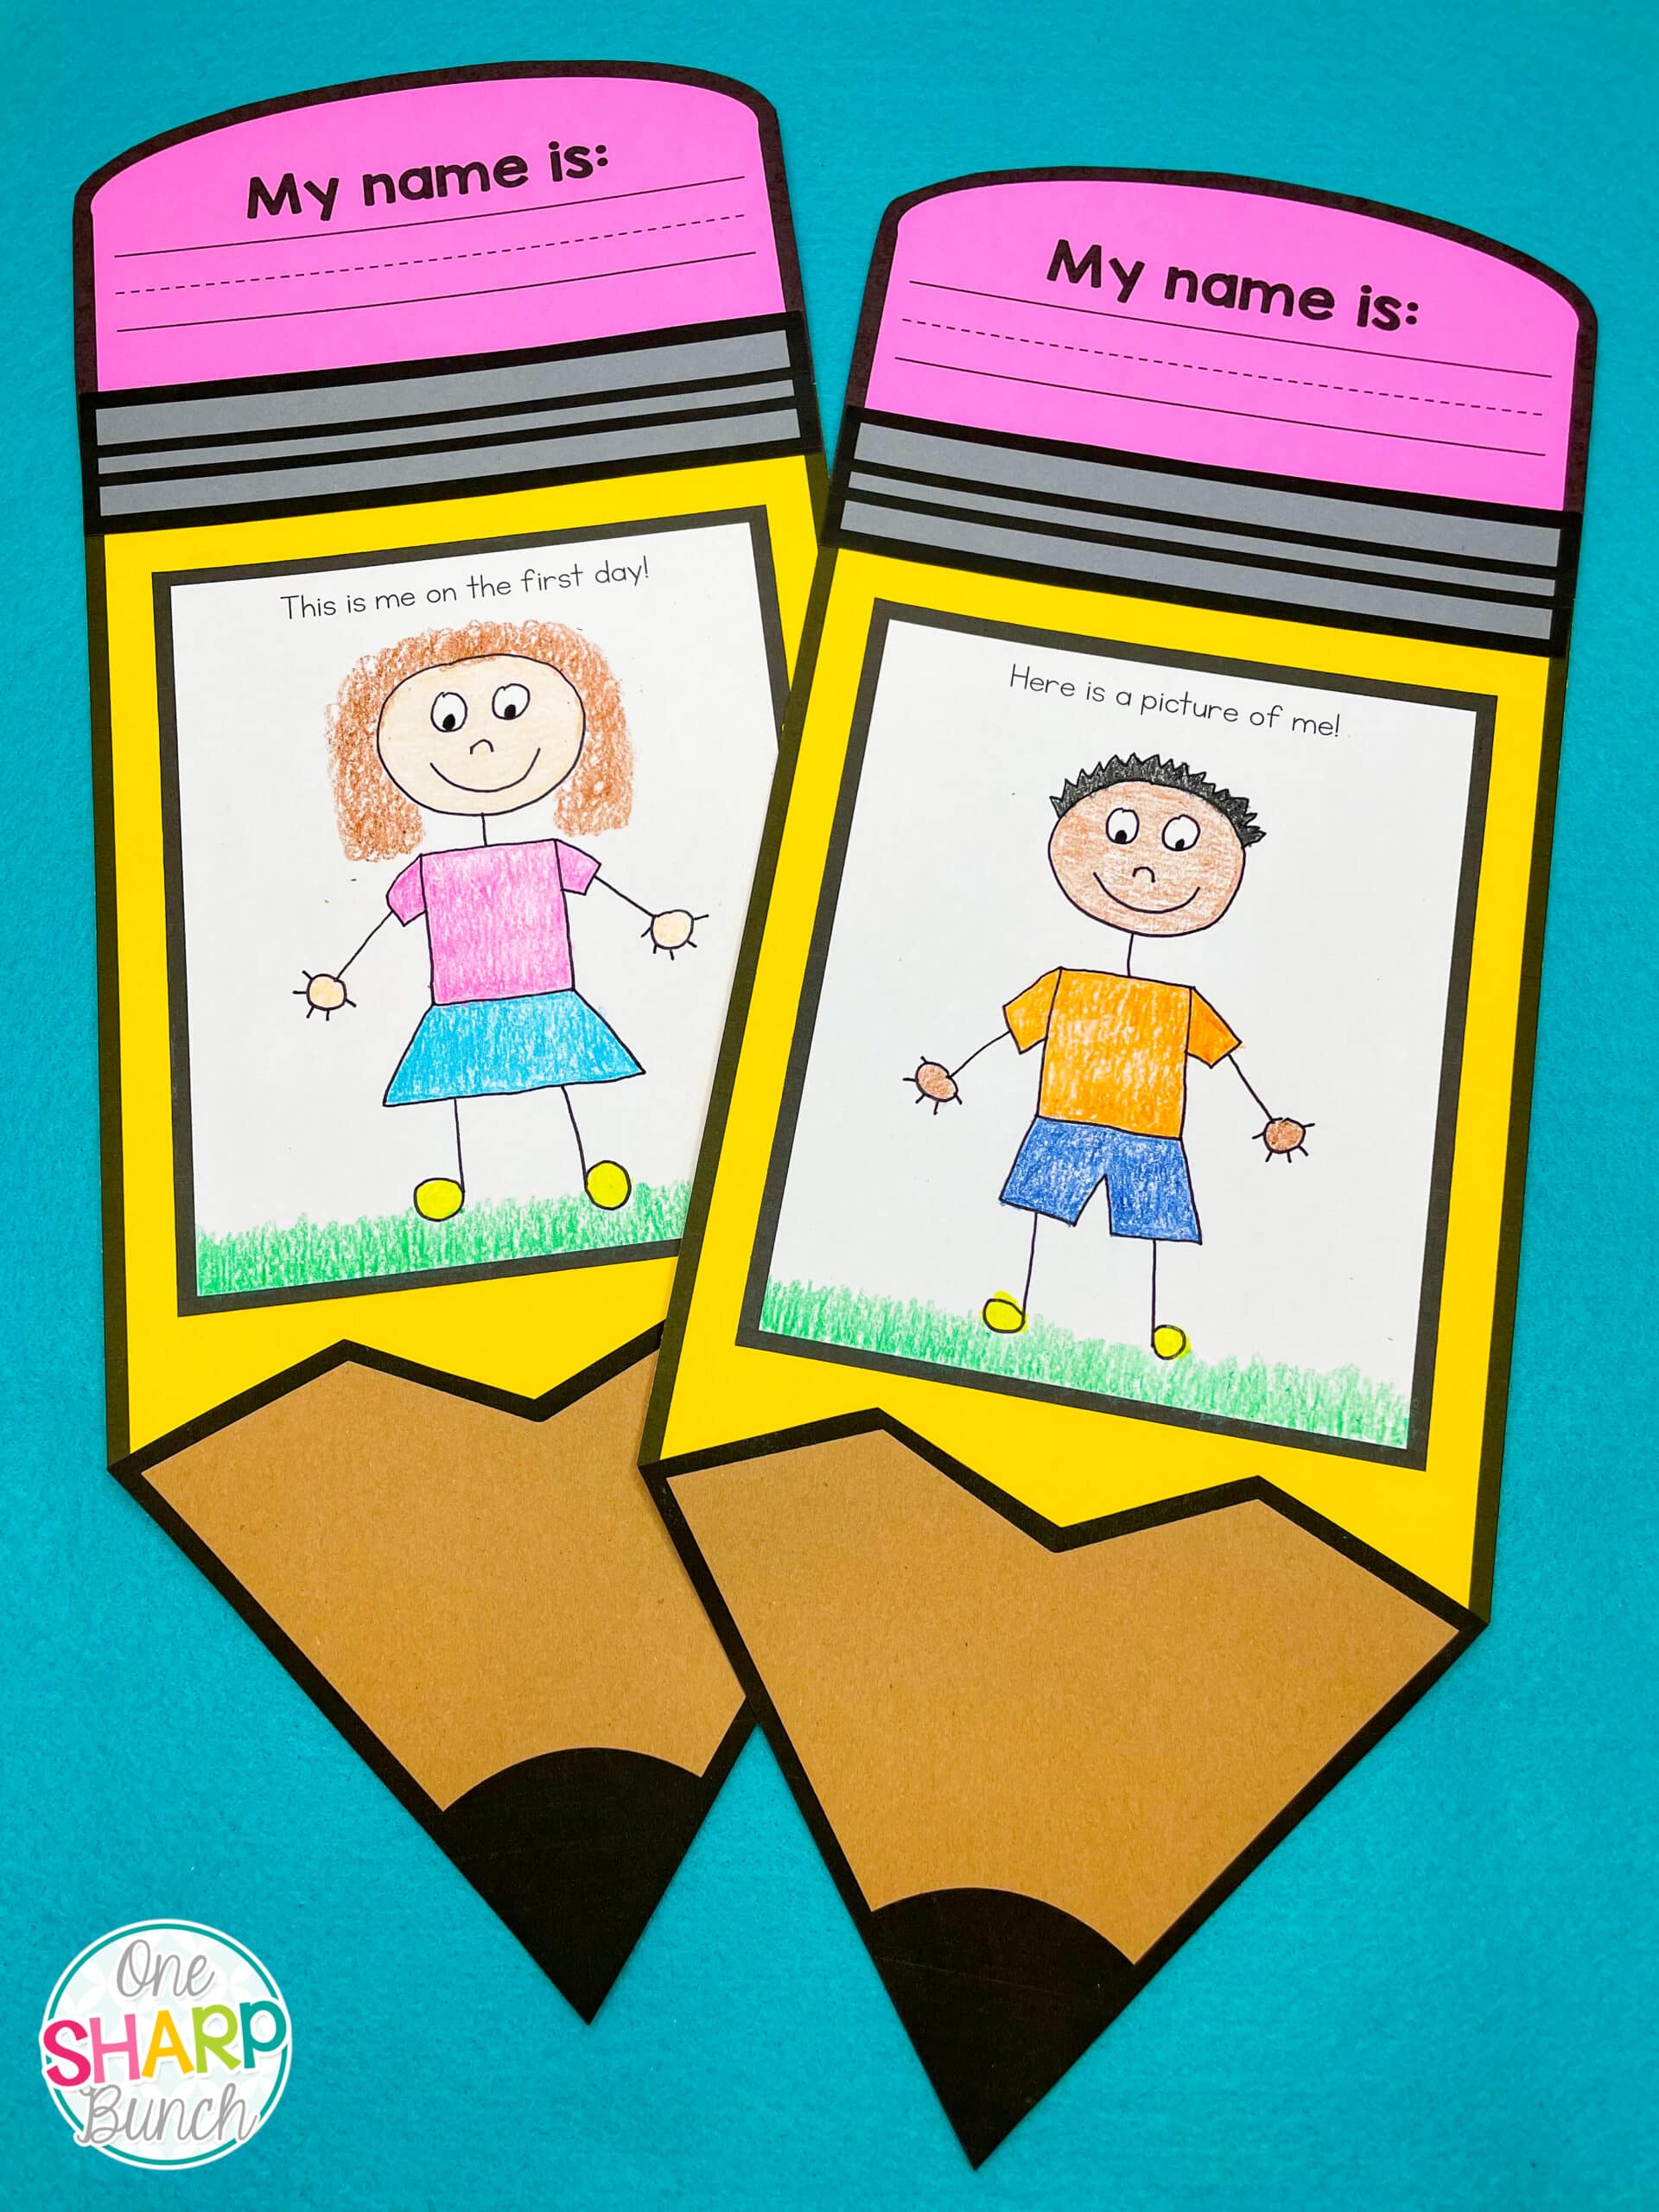 Back to school crafts are a great way to kickoff the new school year! Today, I am sharing some of my favorite back to school crafts for preschool, kindergarten and first grade. You will find a David Goes to School craft, an all about me craft, a first day feelings craft and more. These crafts are great for teaching rules and expectations as well as building a strong classroom community from day one. You will also find name crafts including a Chrysanthemum craft and alphabet name soup craft.